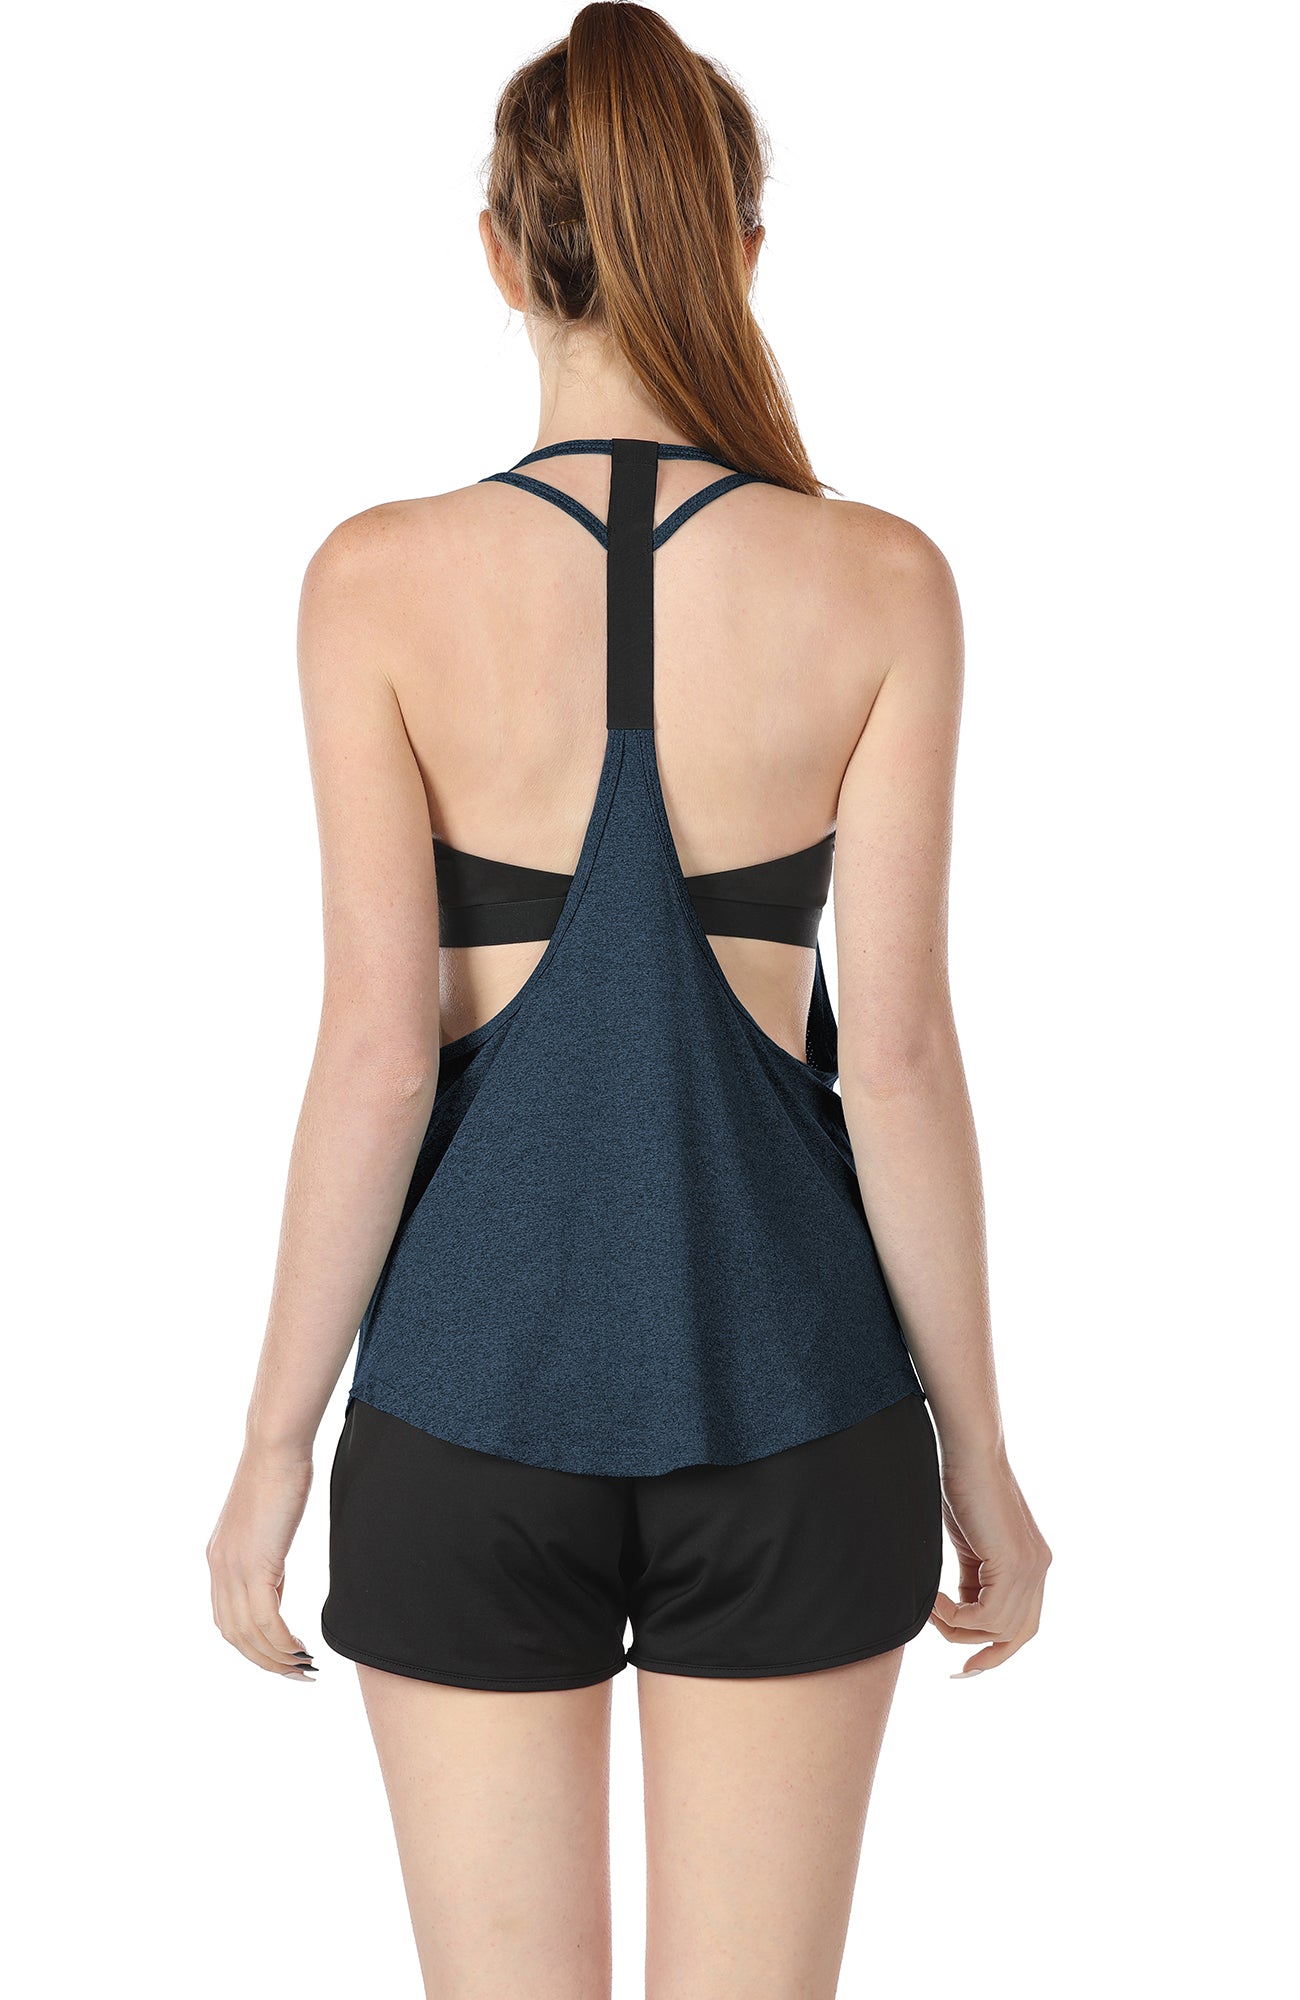 icyzone Workout Tank Tops Built in Bra - Women's Strappy Athletic